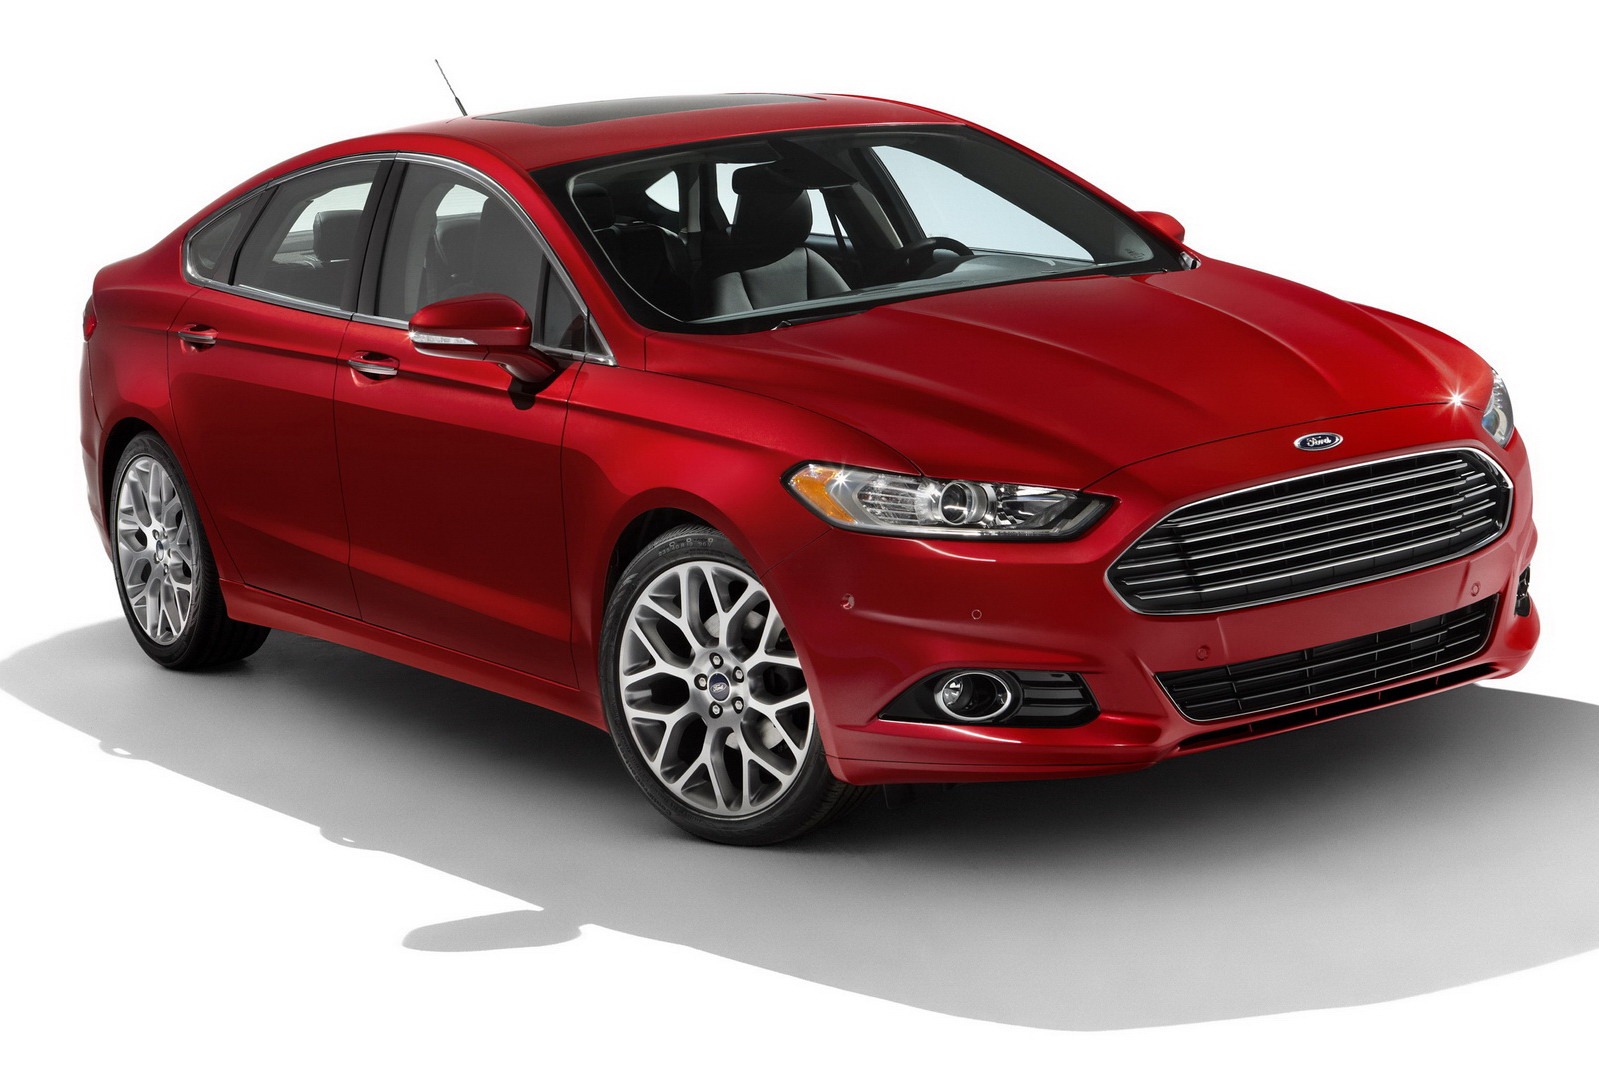 New Ford Fusion 2013 Price with hybrid and Plug-in hybrid model options